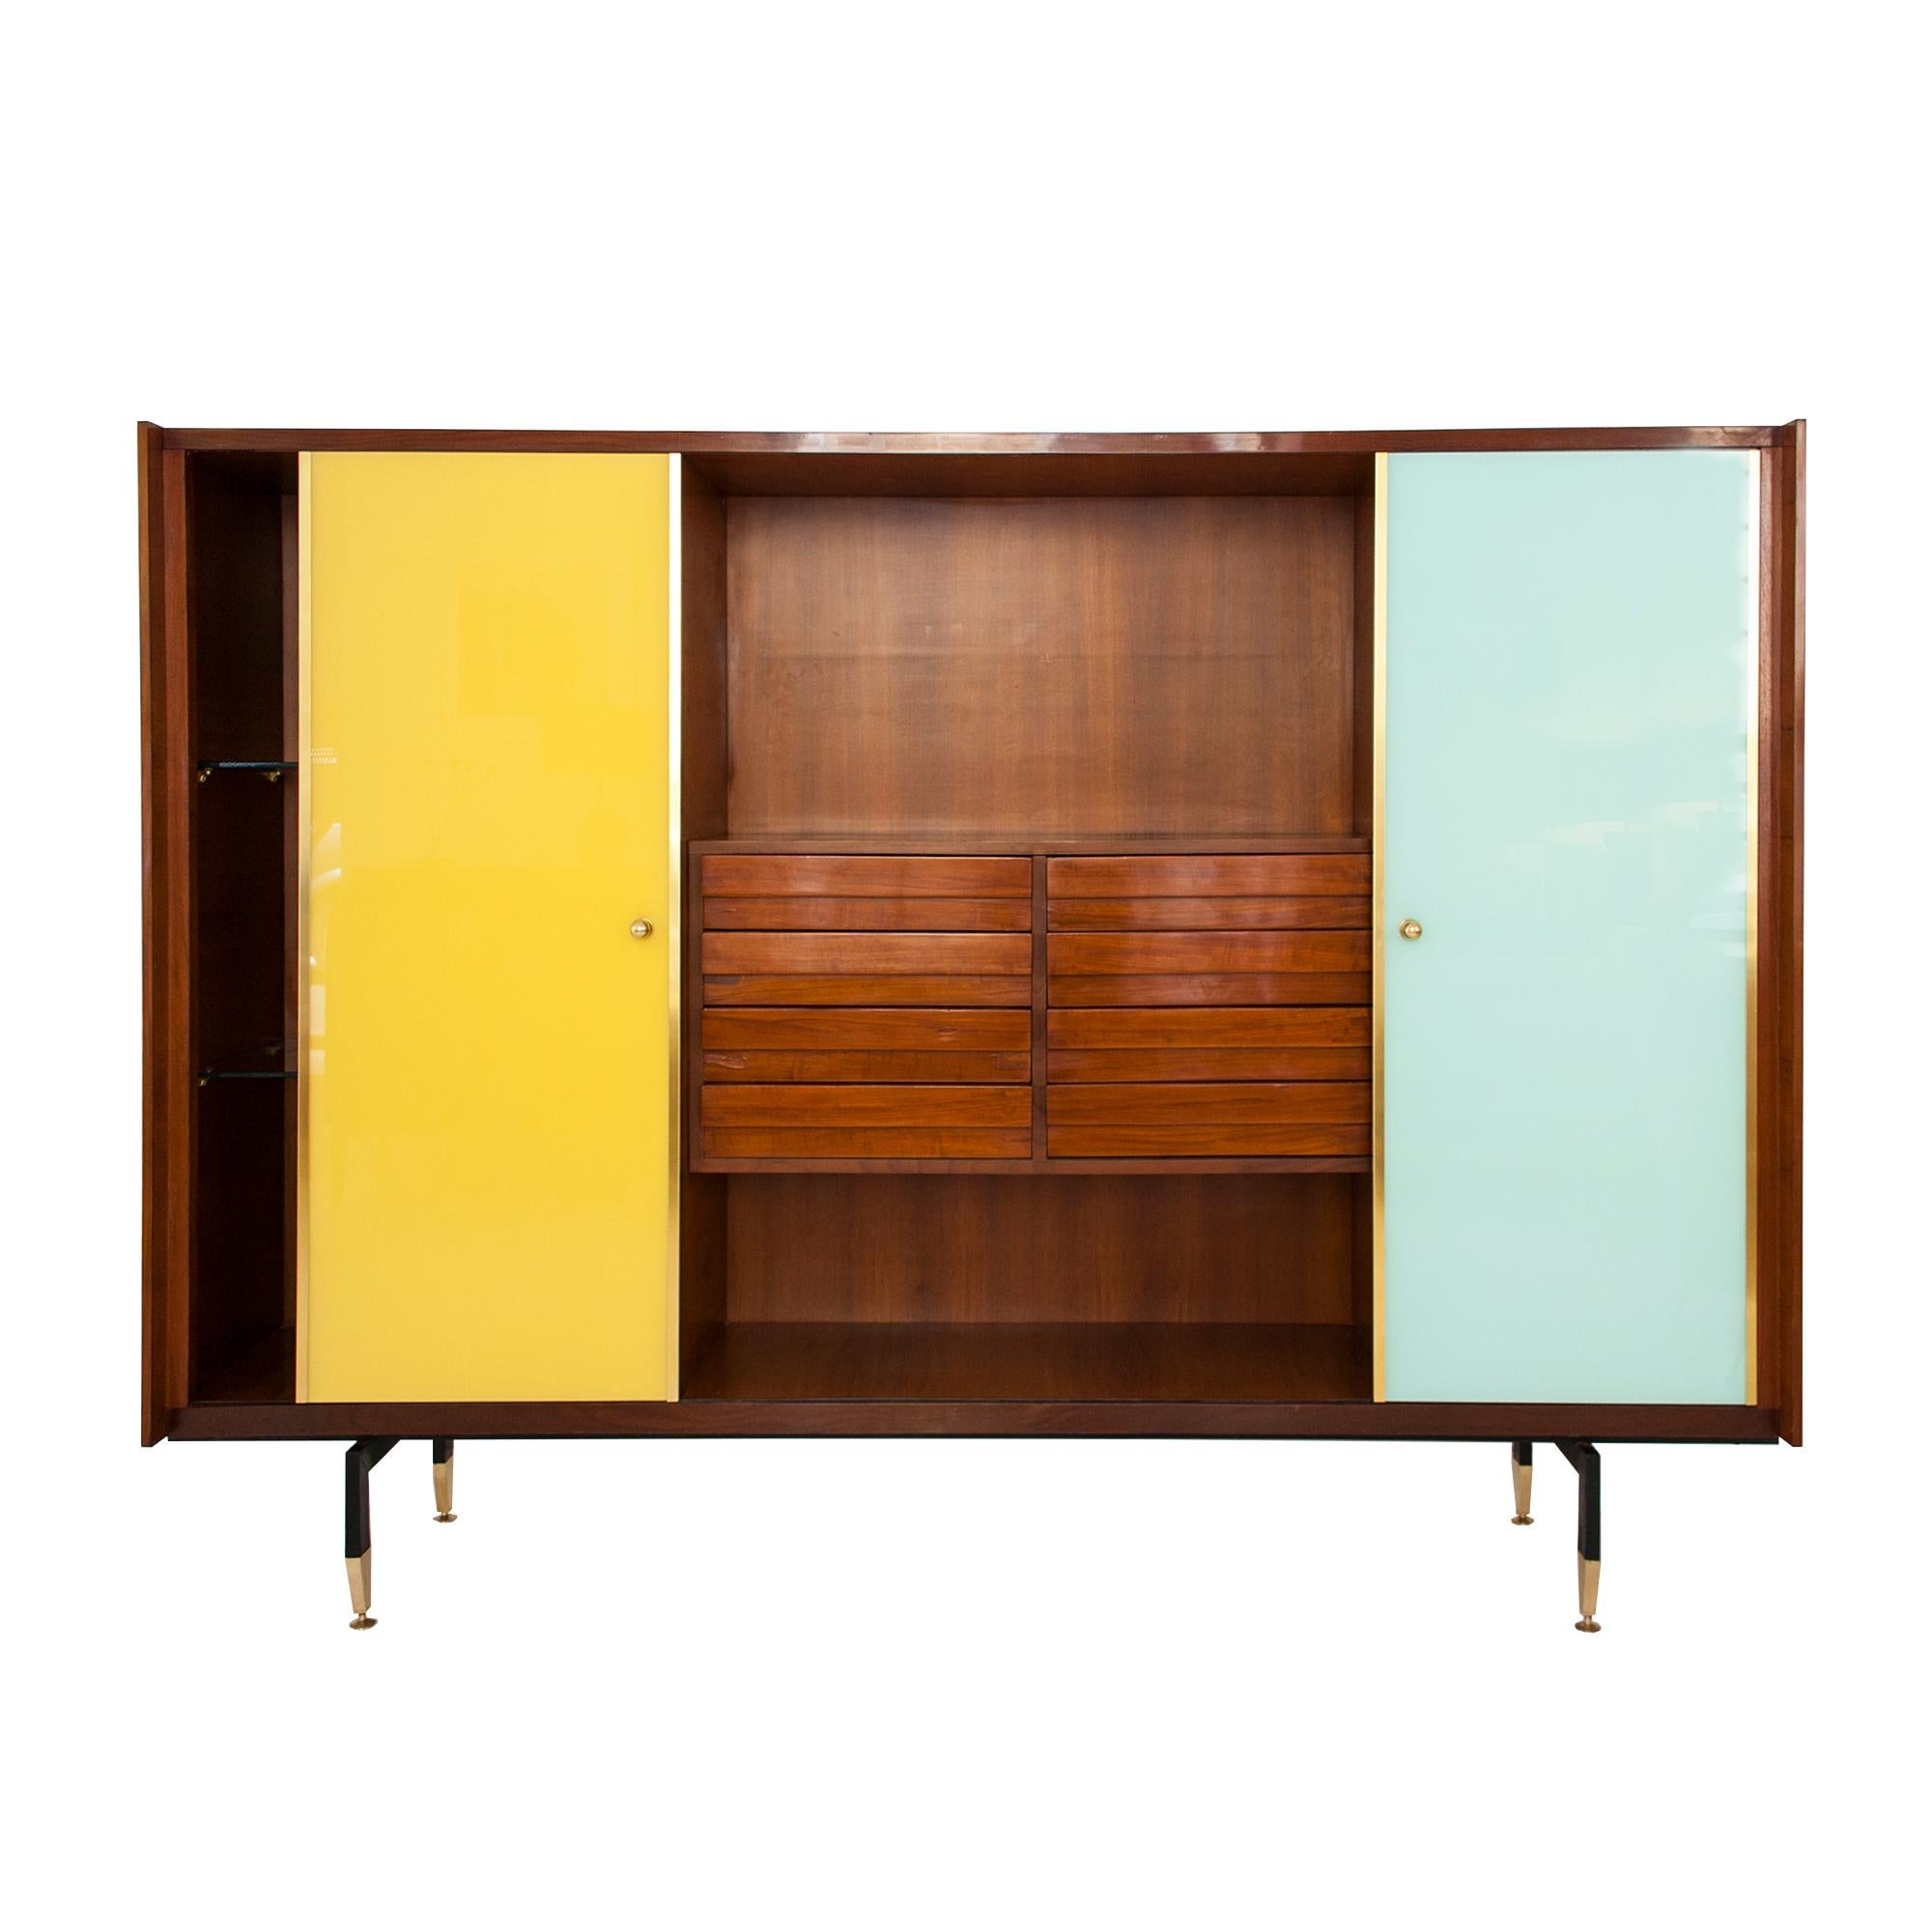 Italian Mid-Century Modern Teak Sideboard with Colored Glass Sliders, Italy, 1960